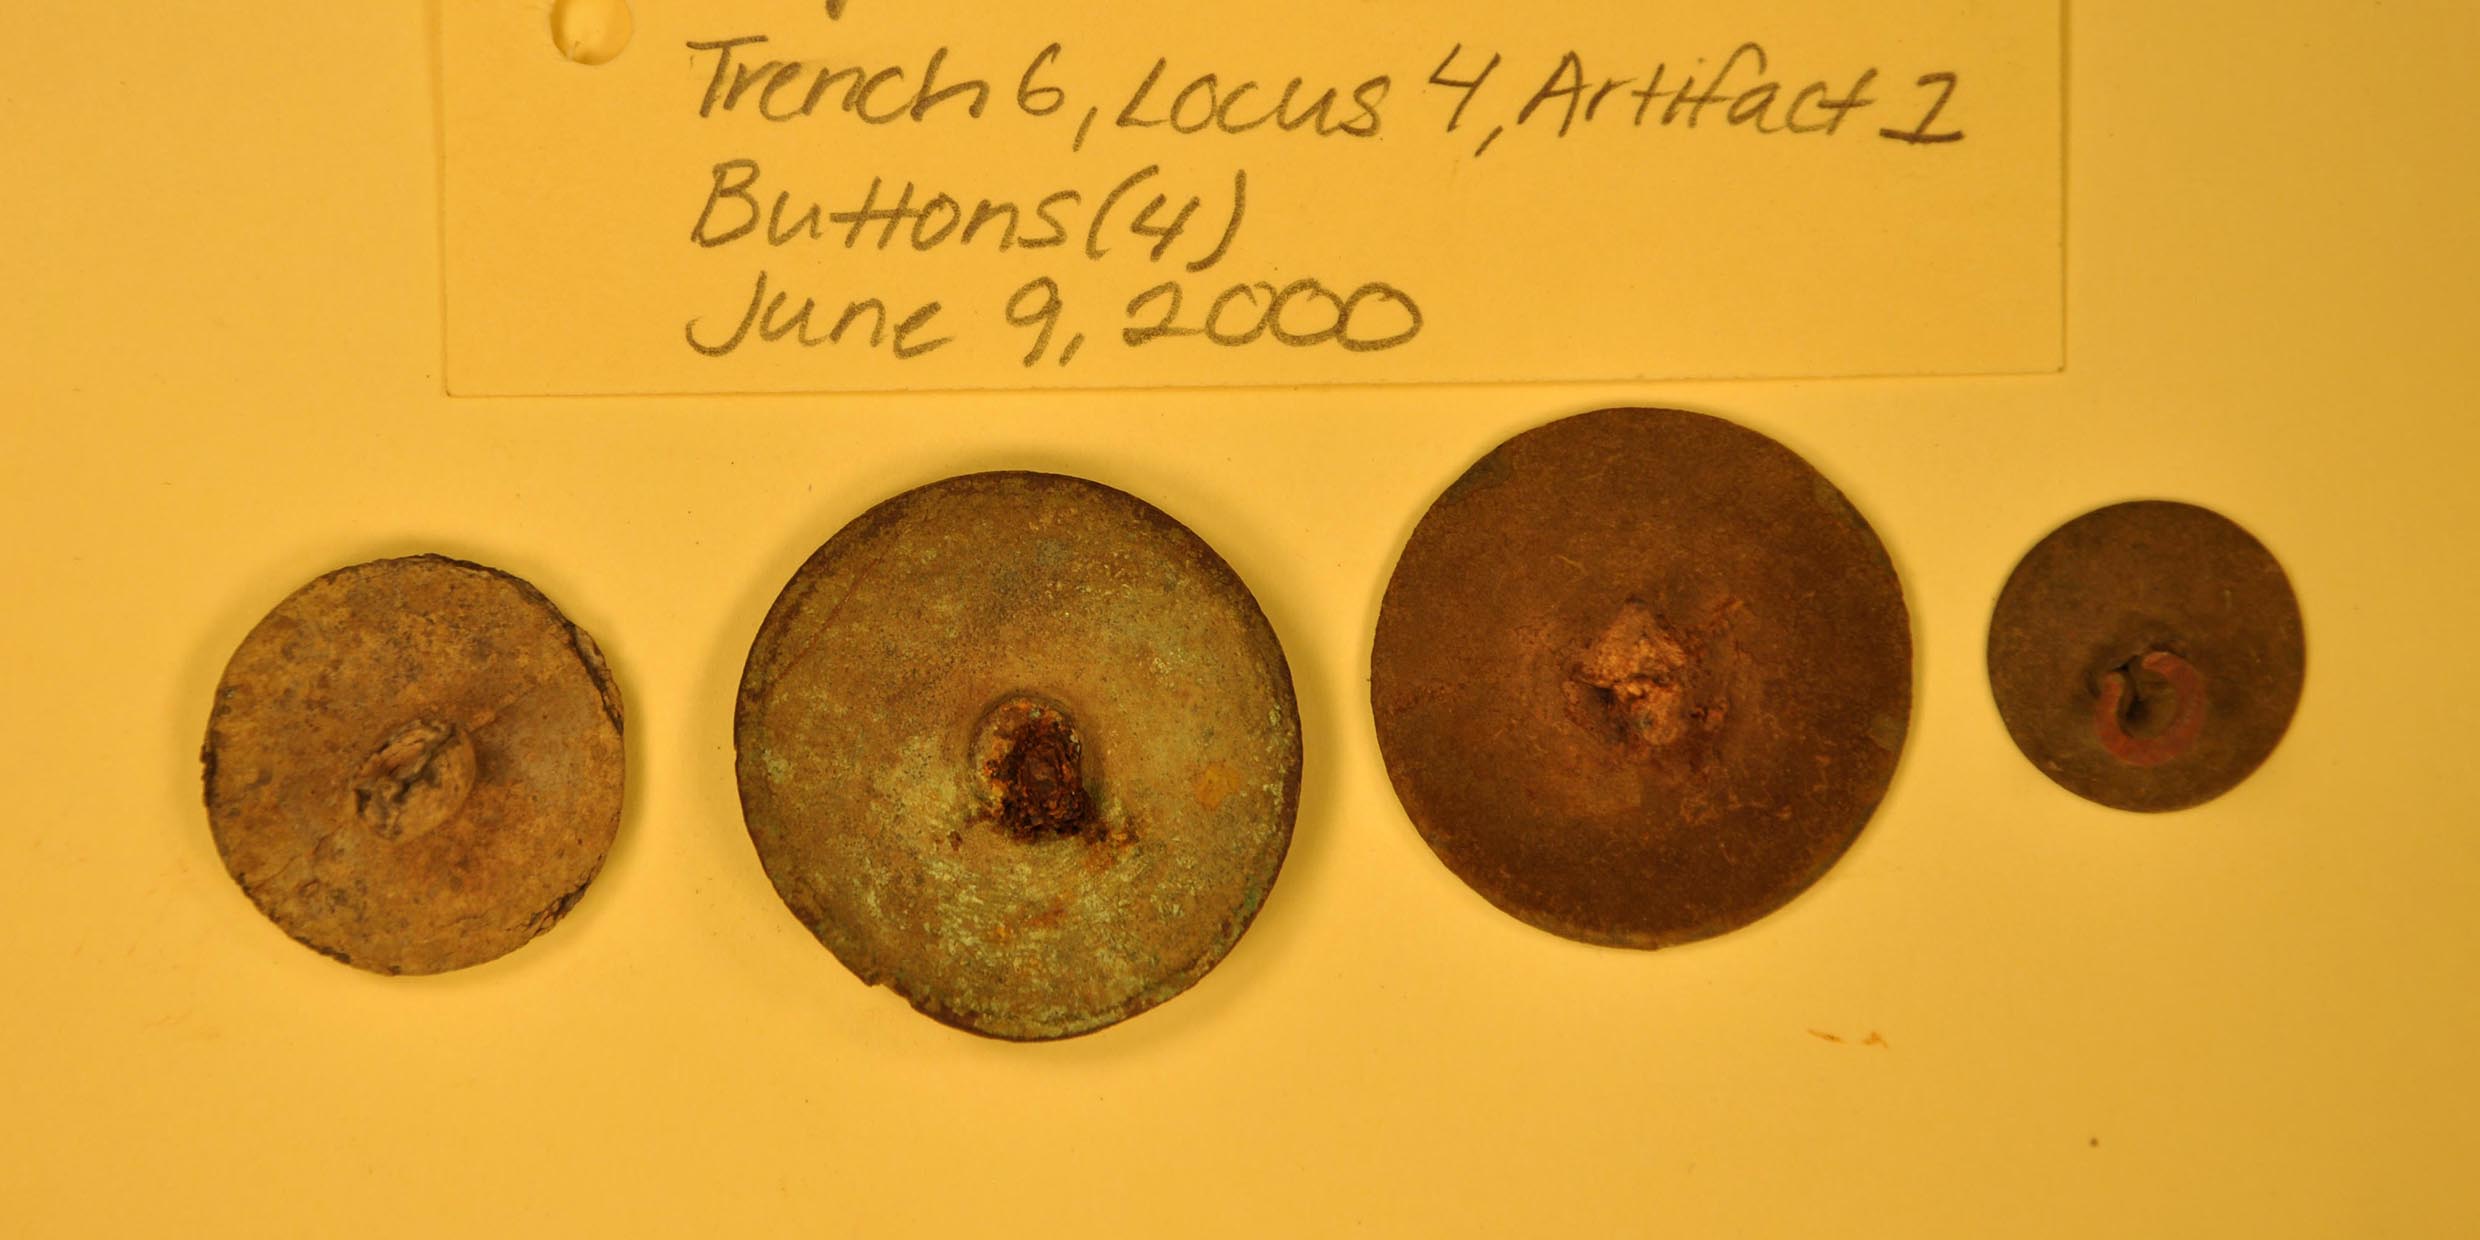 Image of an archaeological display of old buttons